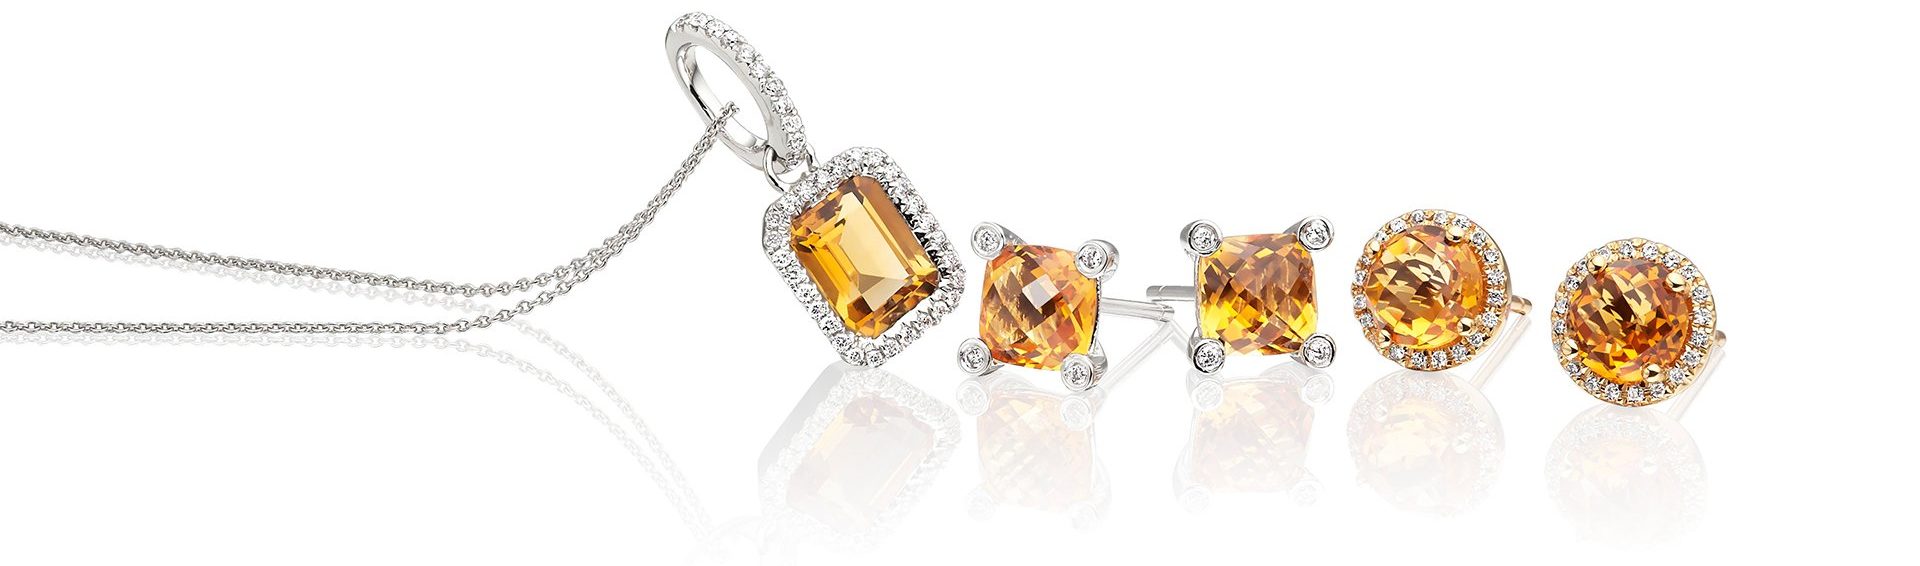 Citrine earrings made from white and yellow gold and citrine necklace made from white gold